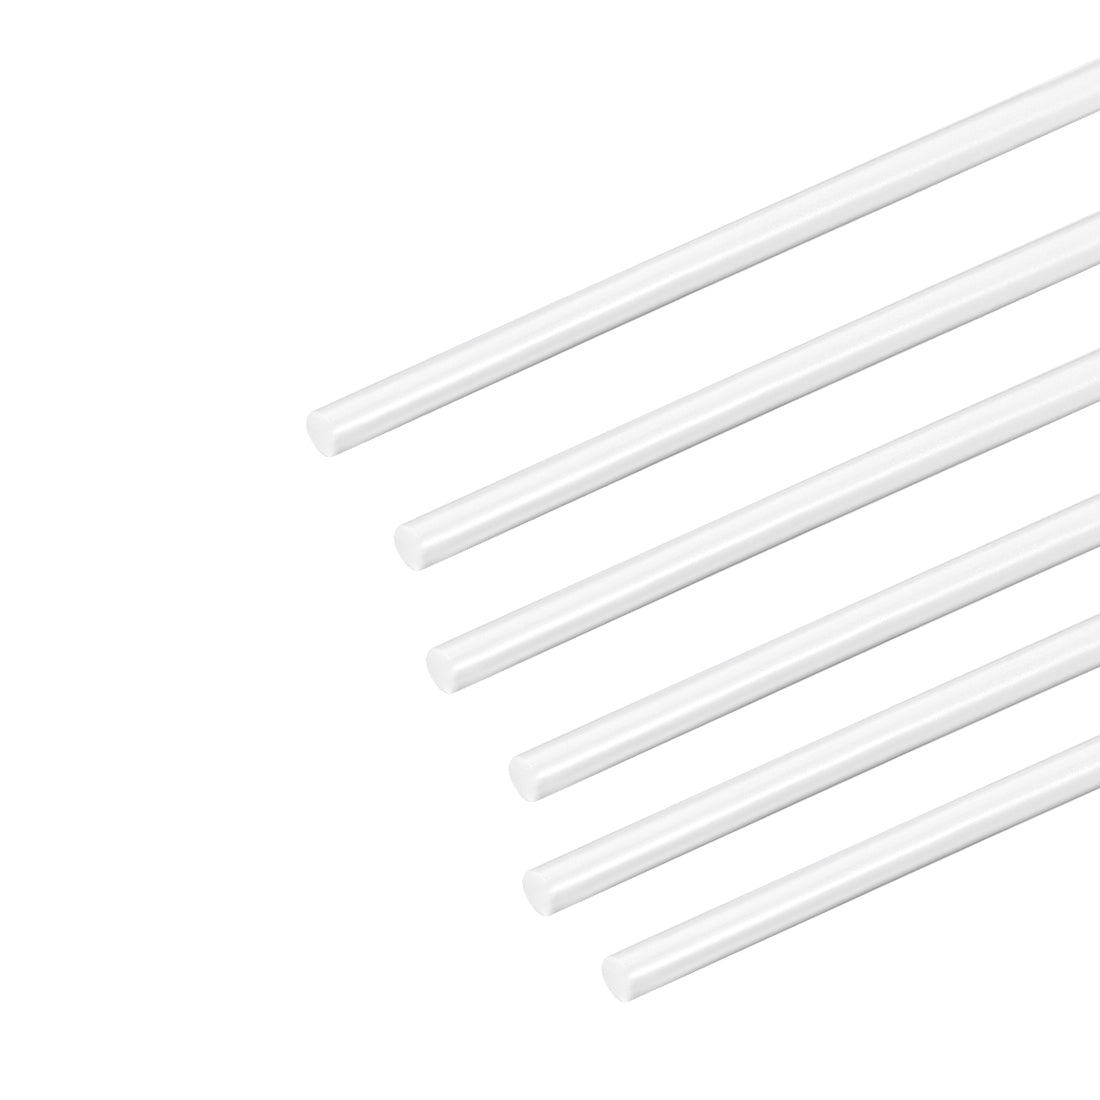 uxcell Uxcell 2mm× 20" ABS Plastic Round Bar Rod for Architectural Model Making DIY White 6pcs